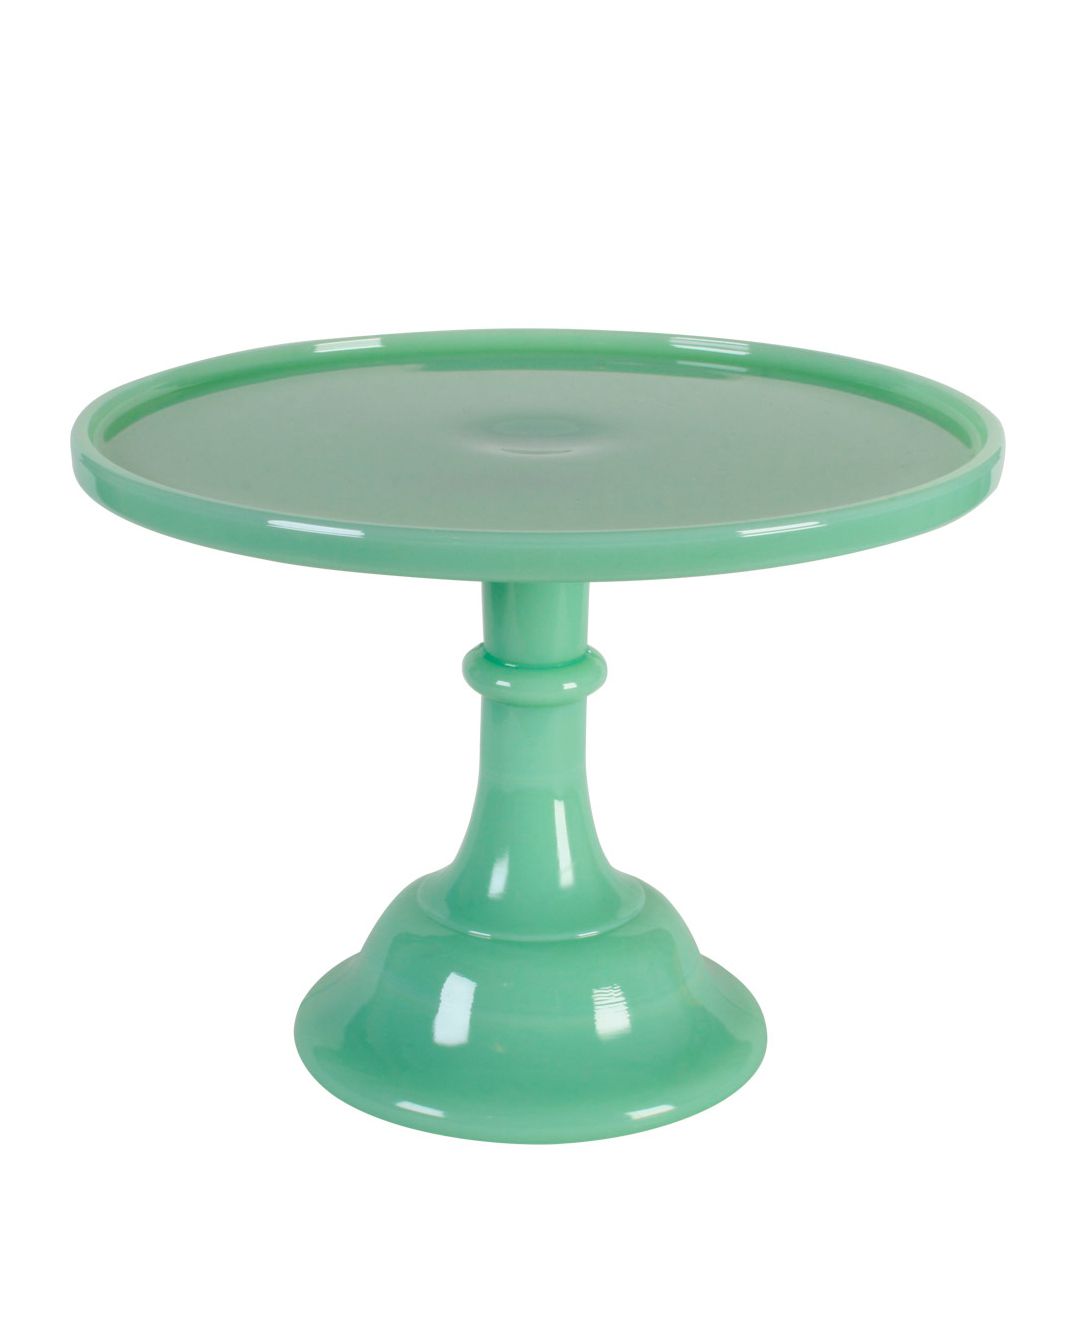 Details about  / CAKE STAND WEDDING CAKE STAND DECORATIVE CAKE STAND SET//2METAL CAKE STAND SQUARE